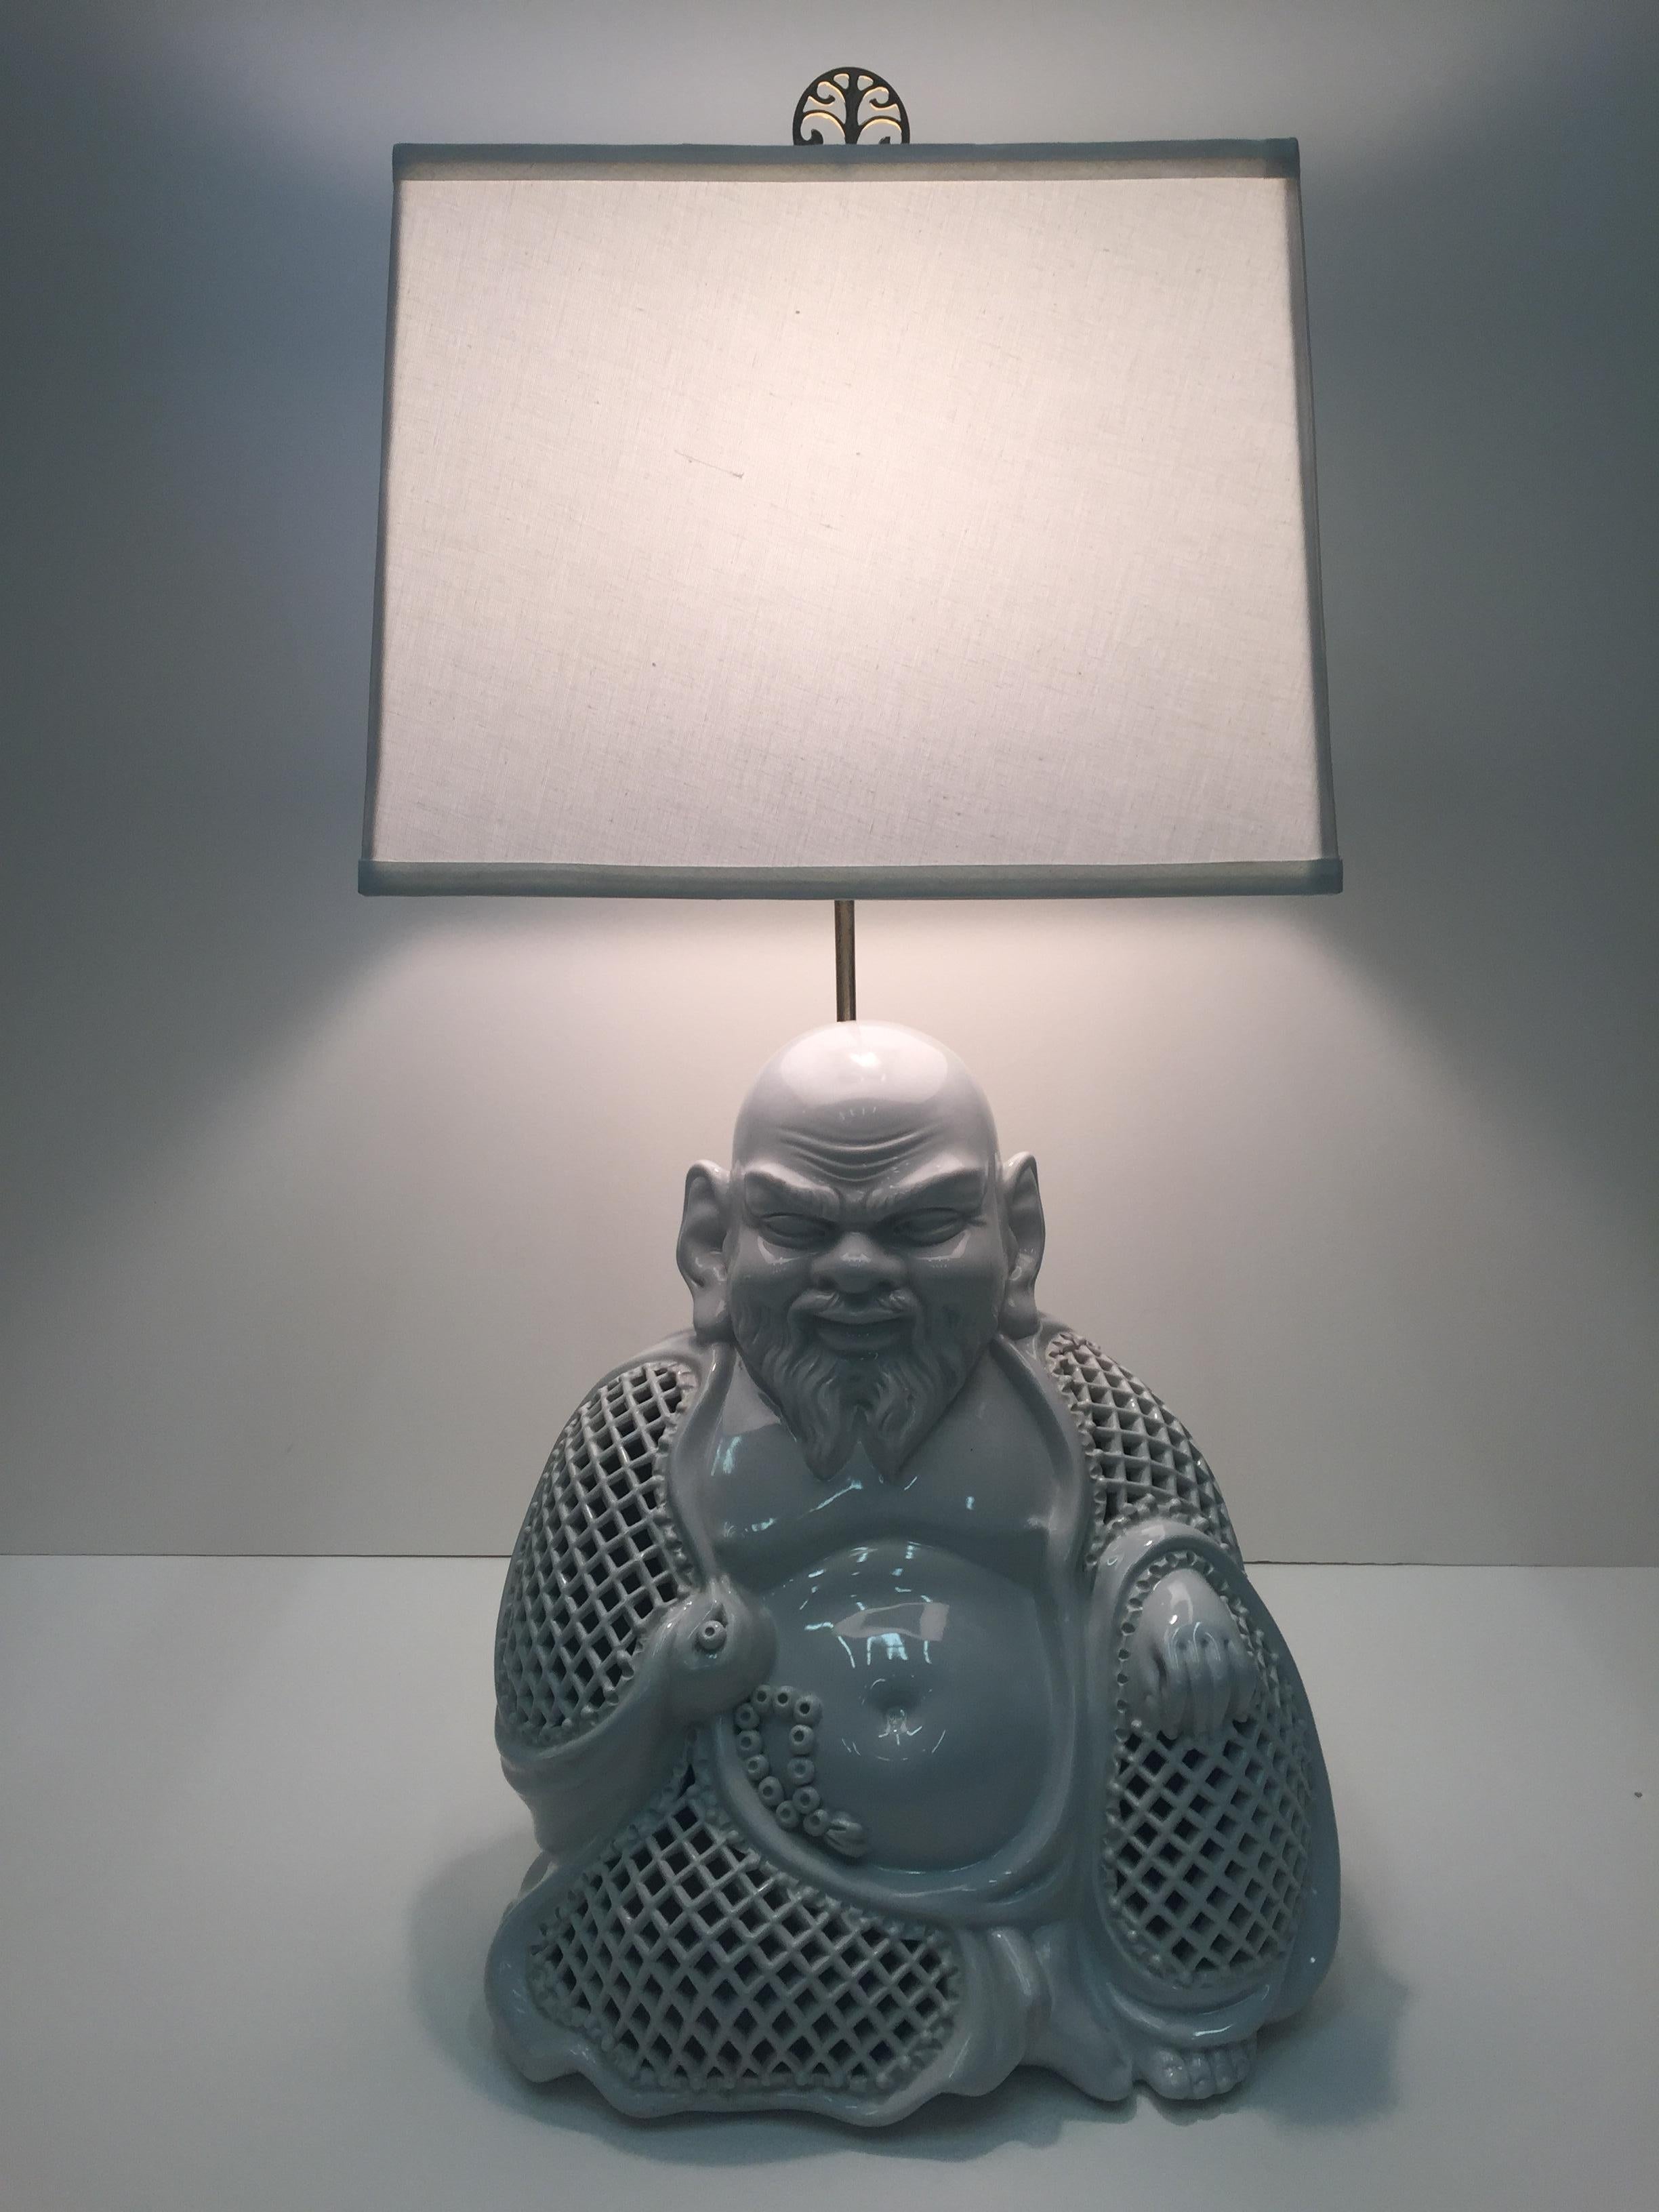 A sensational white ceramic table lamp having a sculptural Buddha with pierced body and happy expression and a beautiful Chinese decorative brass finial.
Shade not included, the one shown is 14 x 14 x 10.